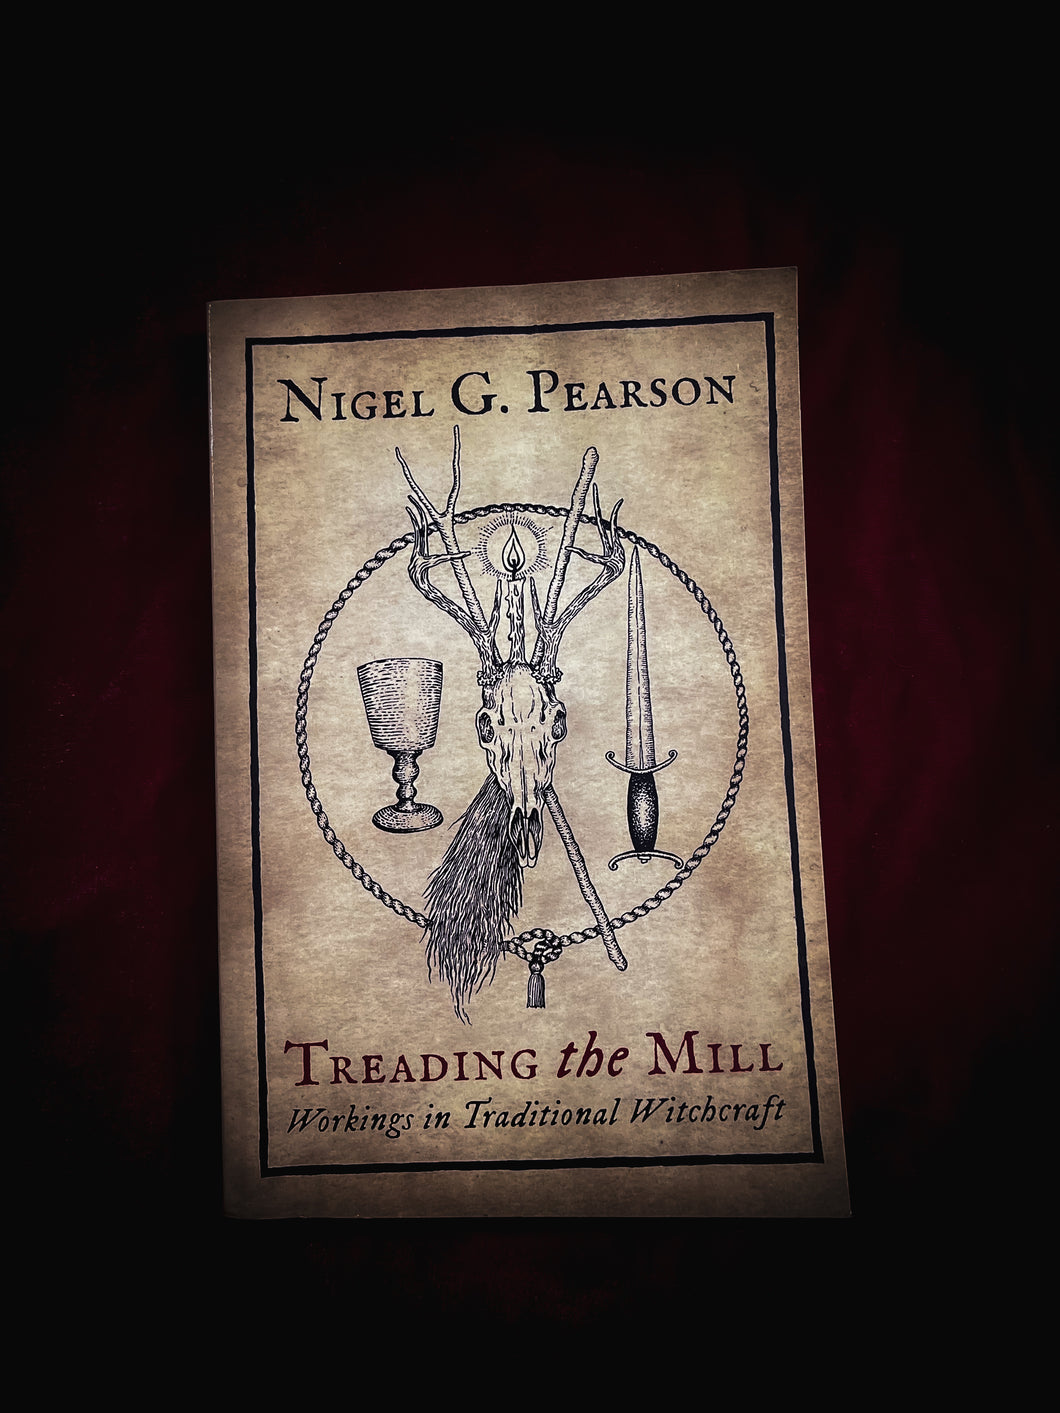 Treading the Mill by Nigel G. Pearson